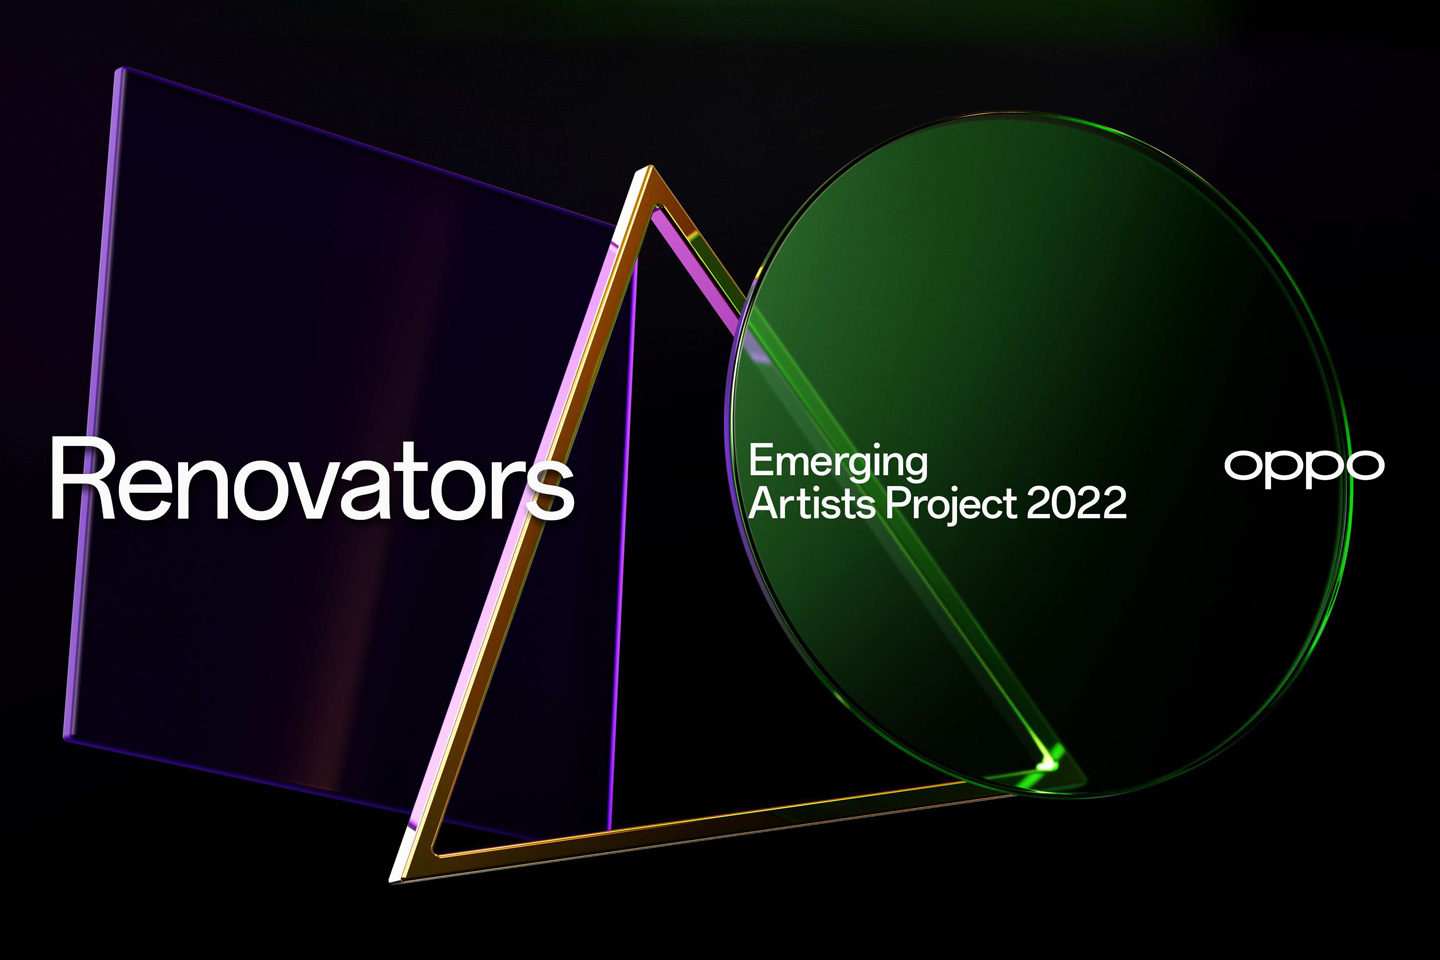 #Oppo announces the 2022 edition of its Renovators Emerging Artists Project with prizes up to $15K